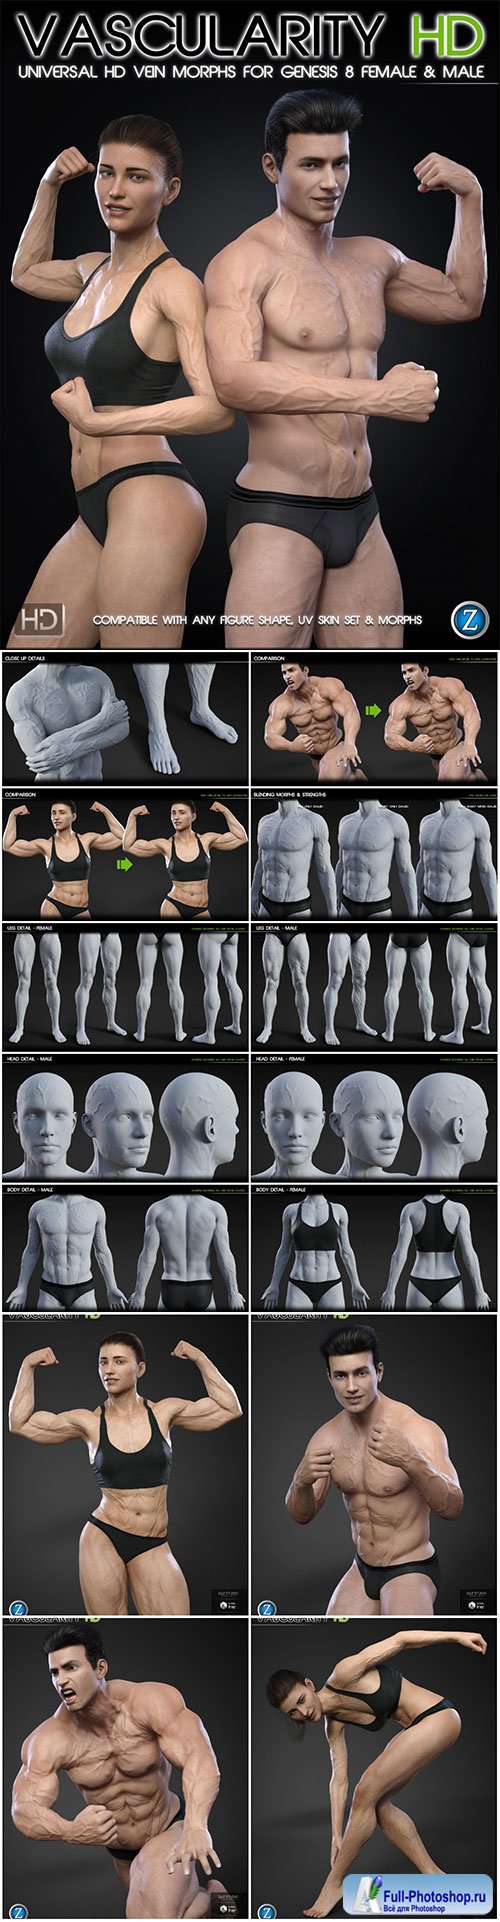 Vascularity HD for Genesis 8 Female and Male